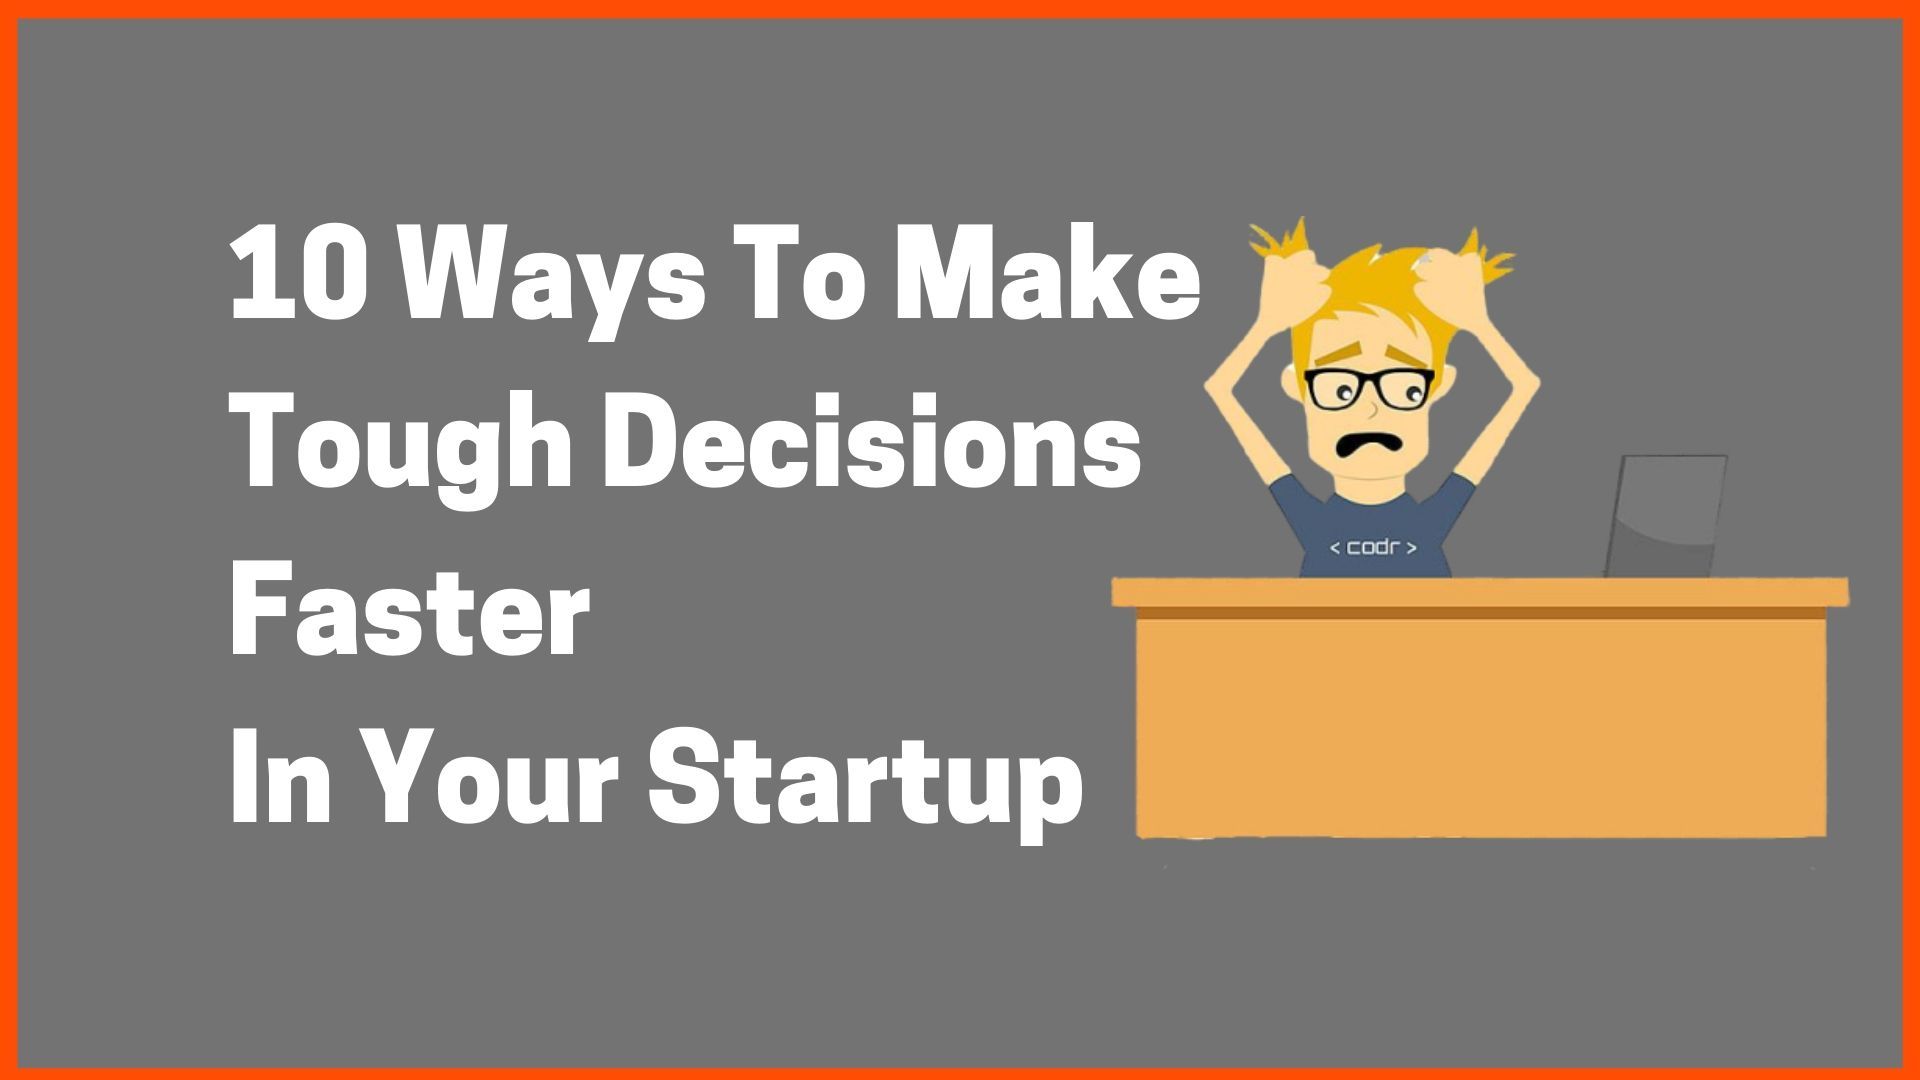 10 Ways To Make Tough Decisions Faster In Your Startup